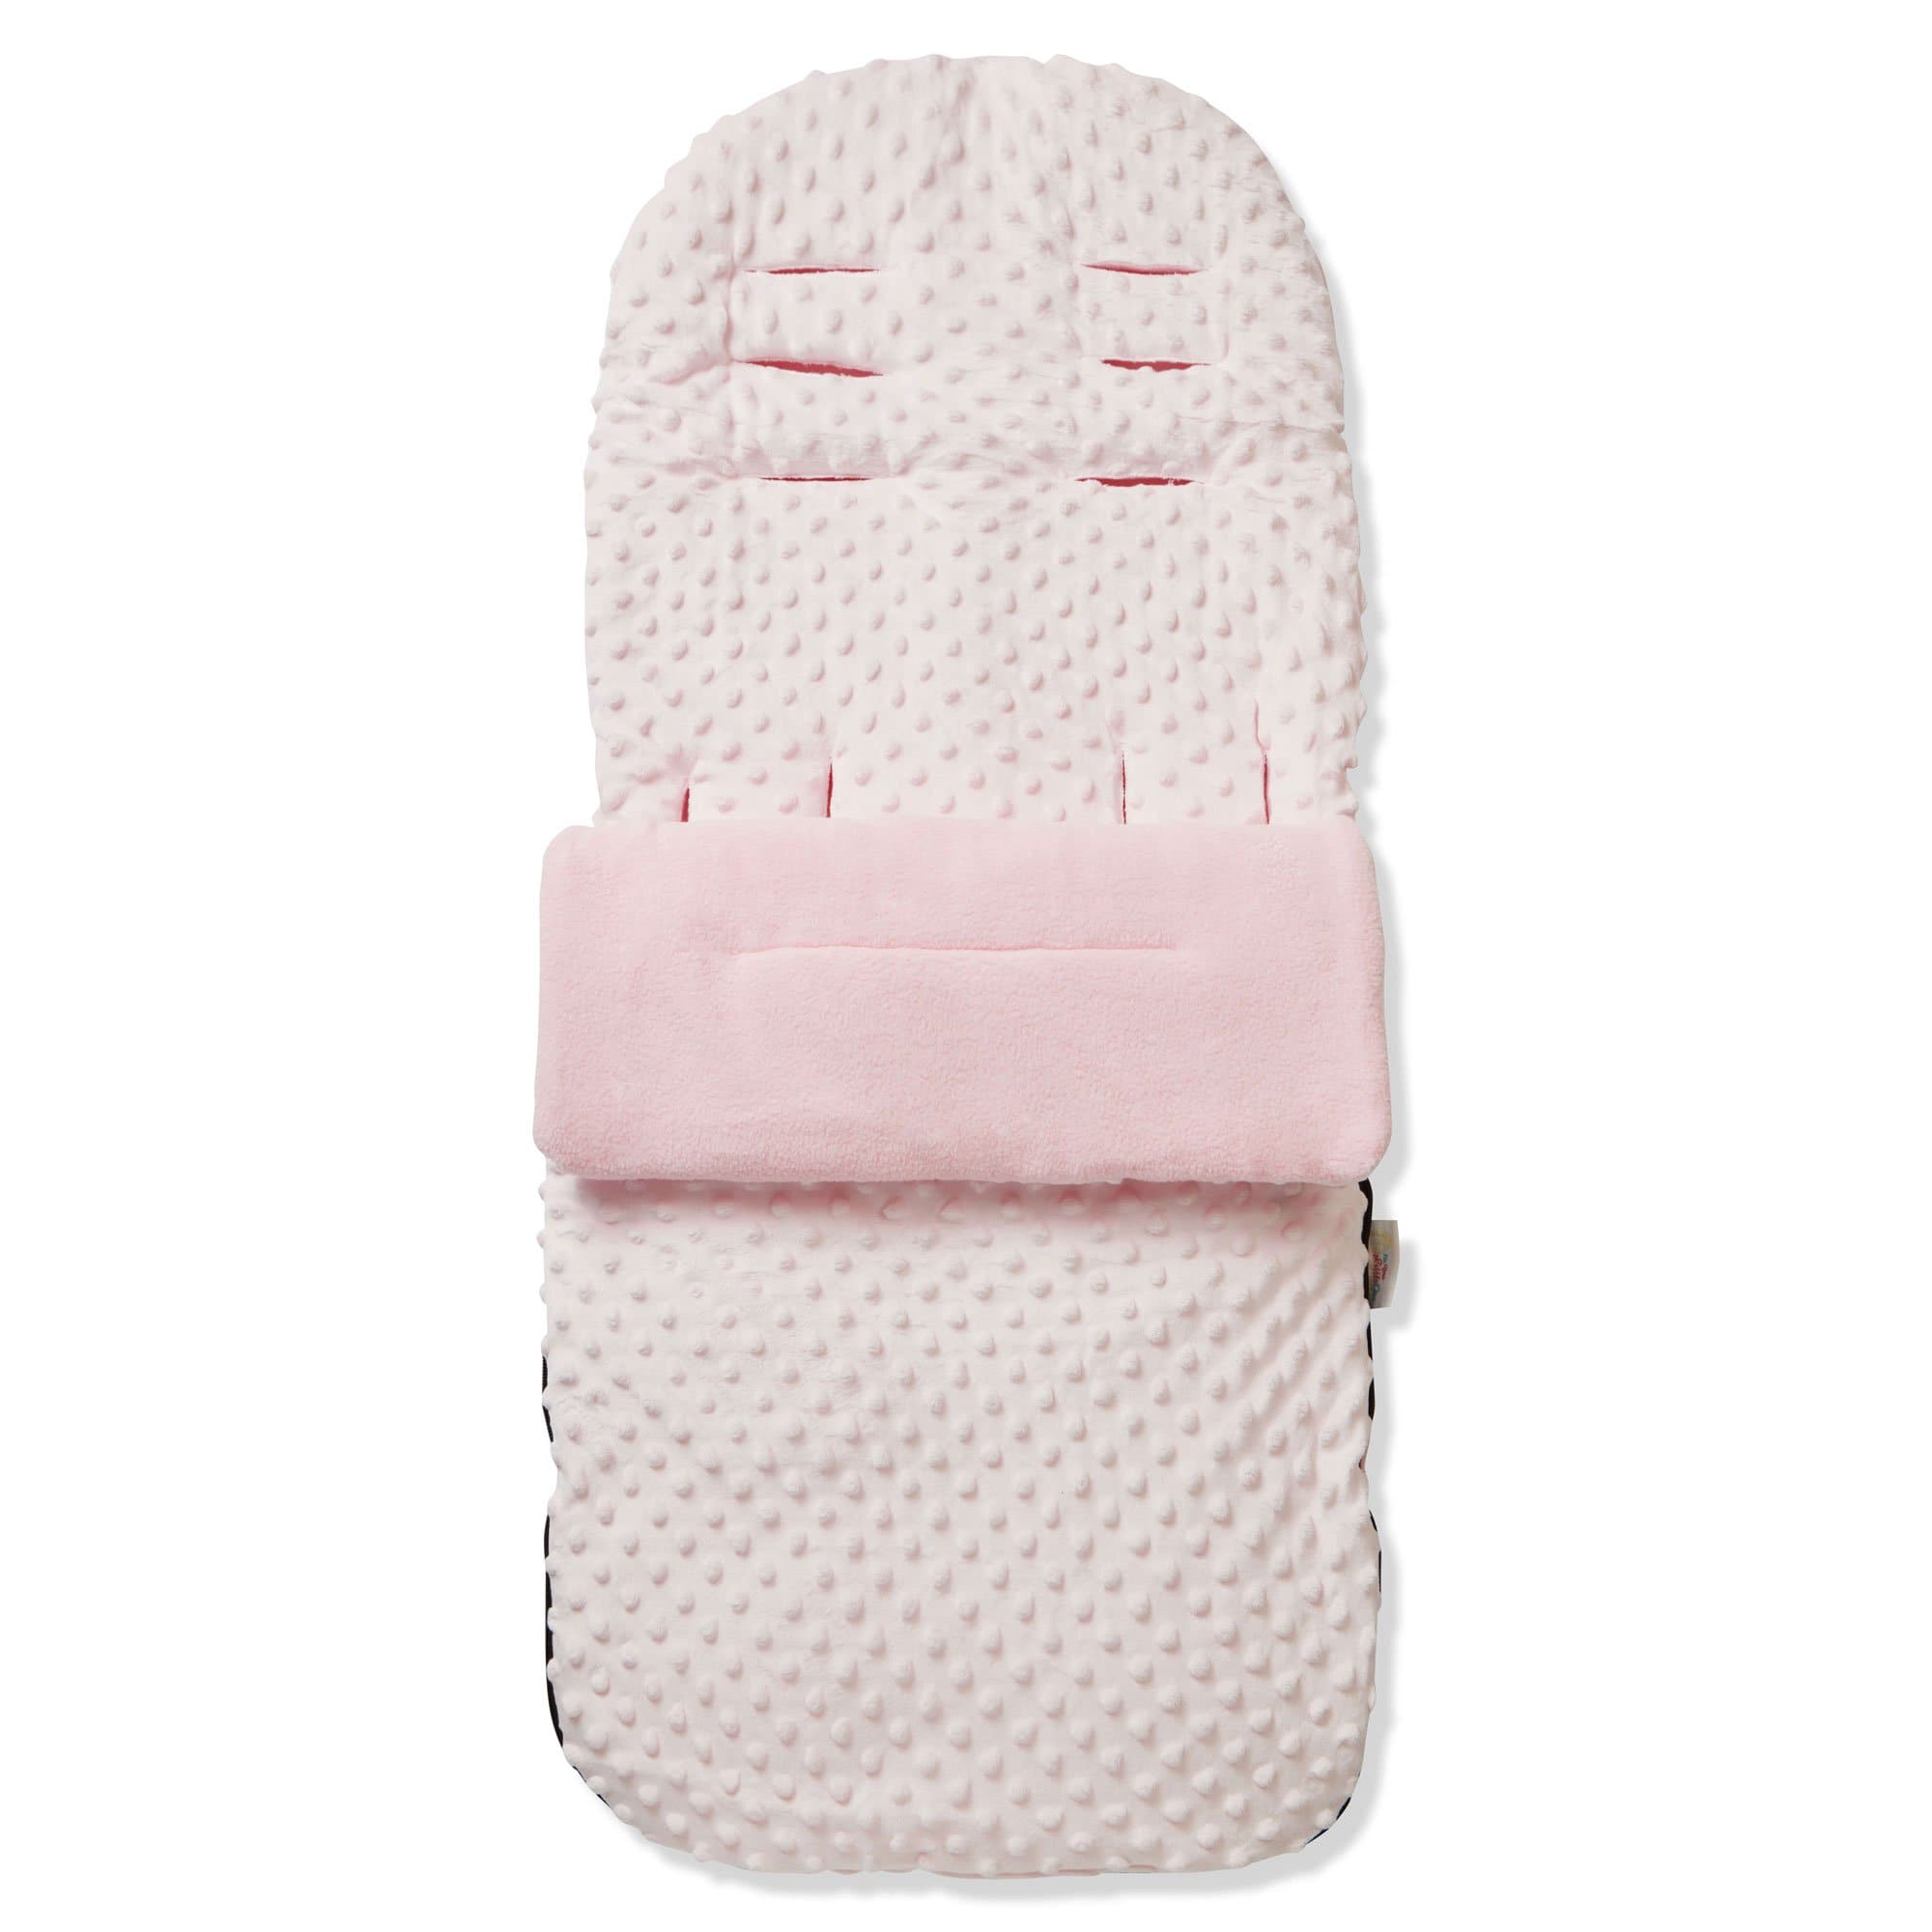 Dimple Footmuff / Cosy Toes Compatible with Seed - For Your Little One